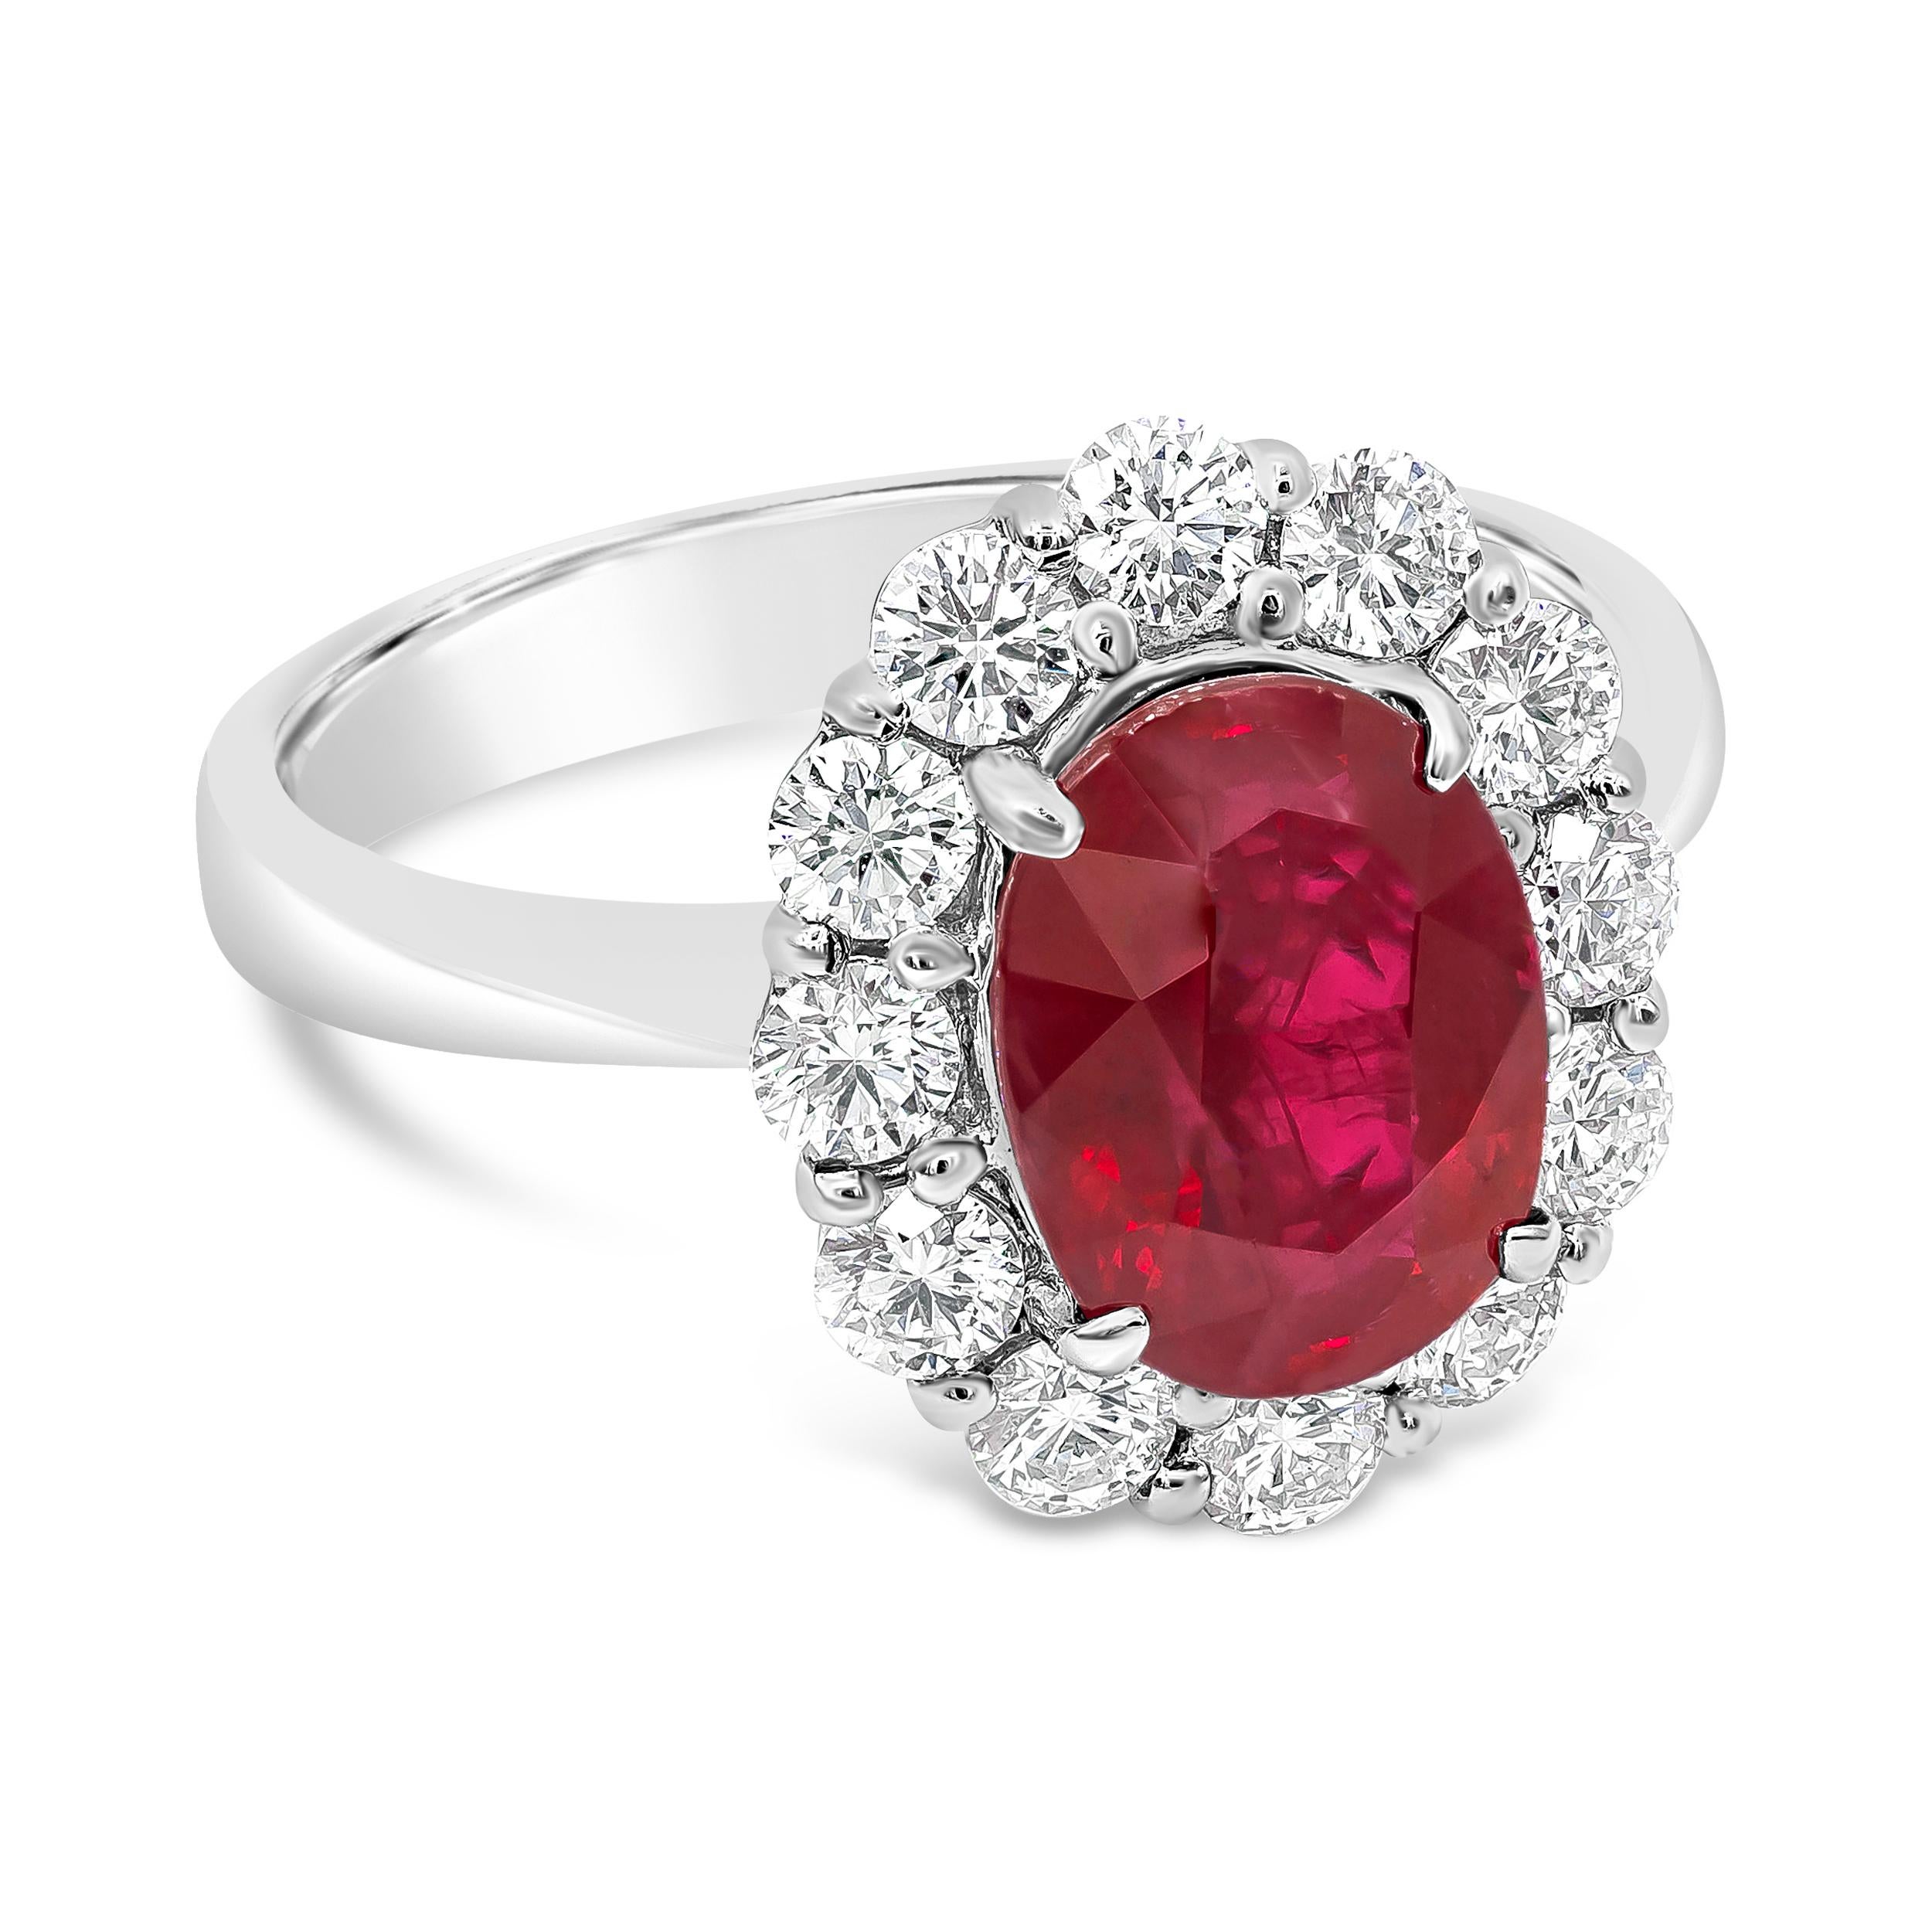 Showcasing a vibrant oval cut ruby weighing 3.00 carats, surrounded by a row of round brilliant diamonds weighing 0.89 carat total. Set in a polished 18 karat white gold mounting. 

Roman Malakov is a custom house, specializing in creating anything